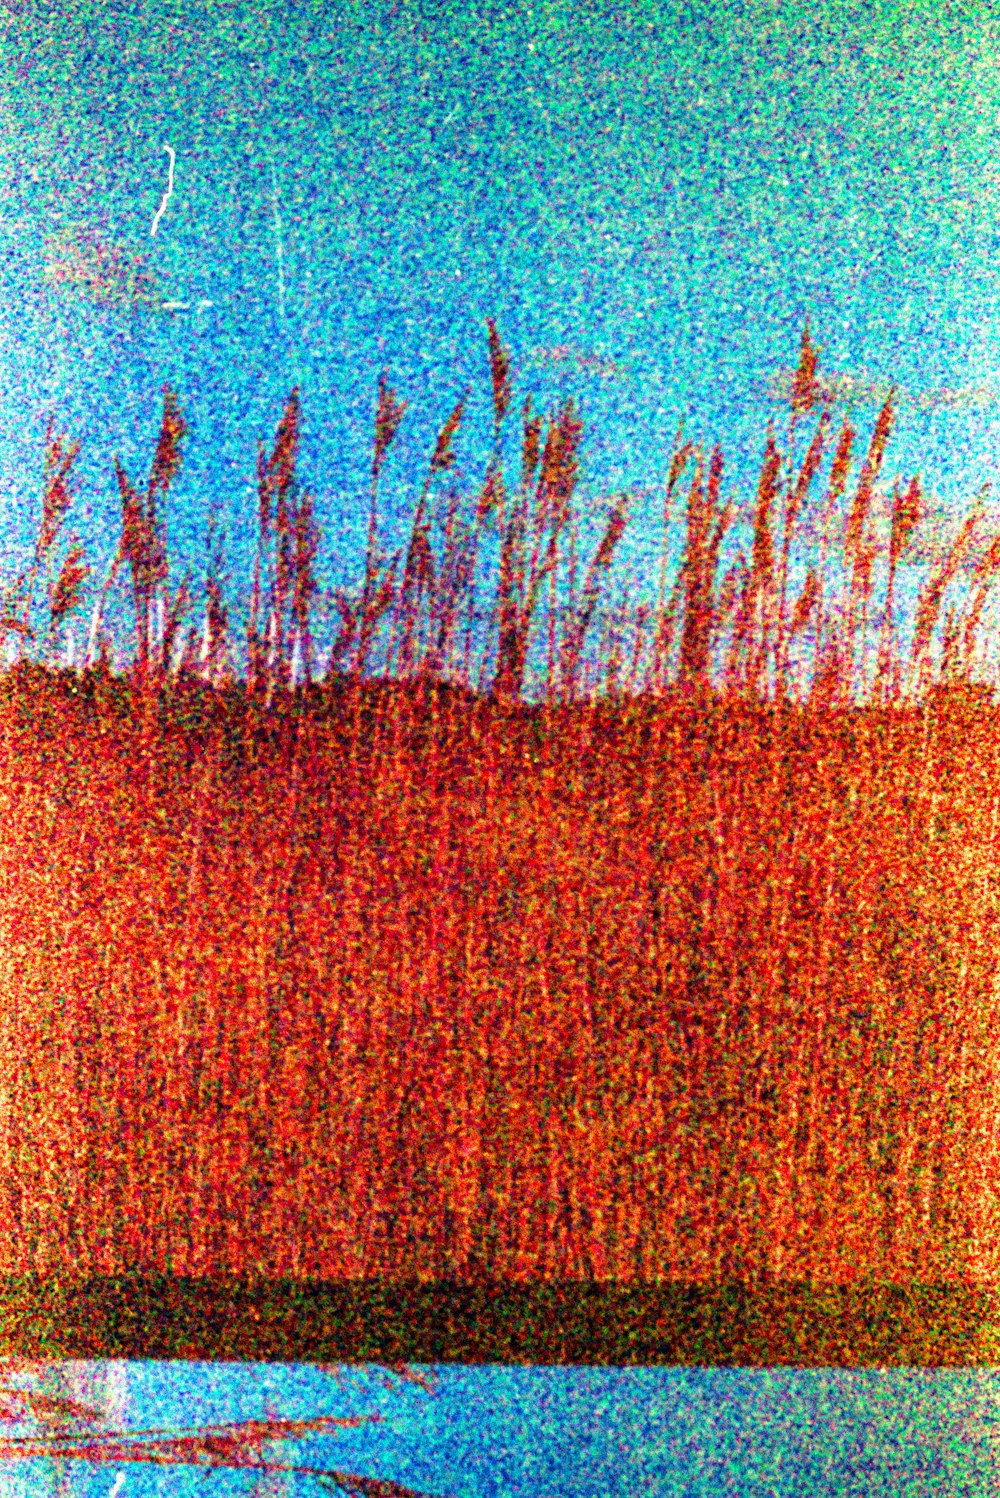 a painting of grass and water with a blue sky in the background